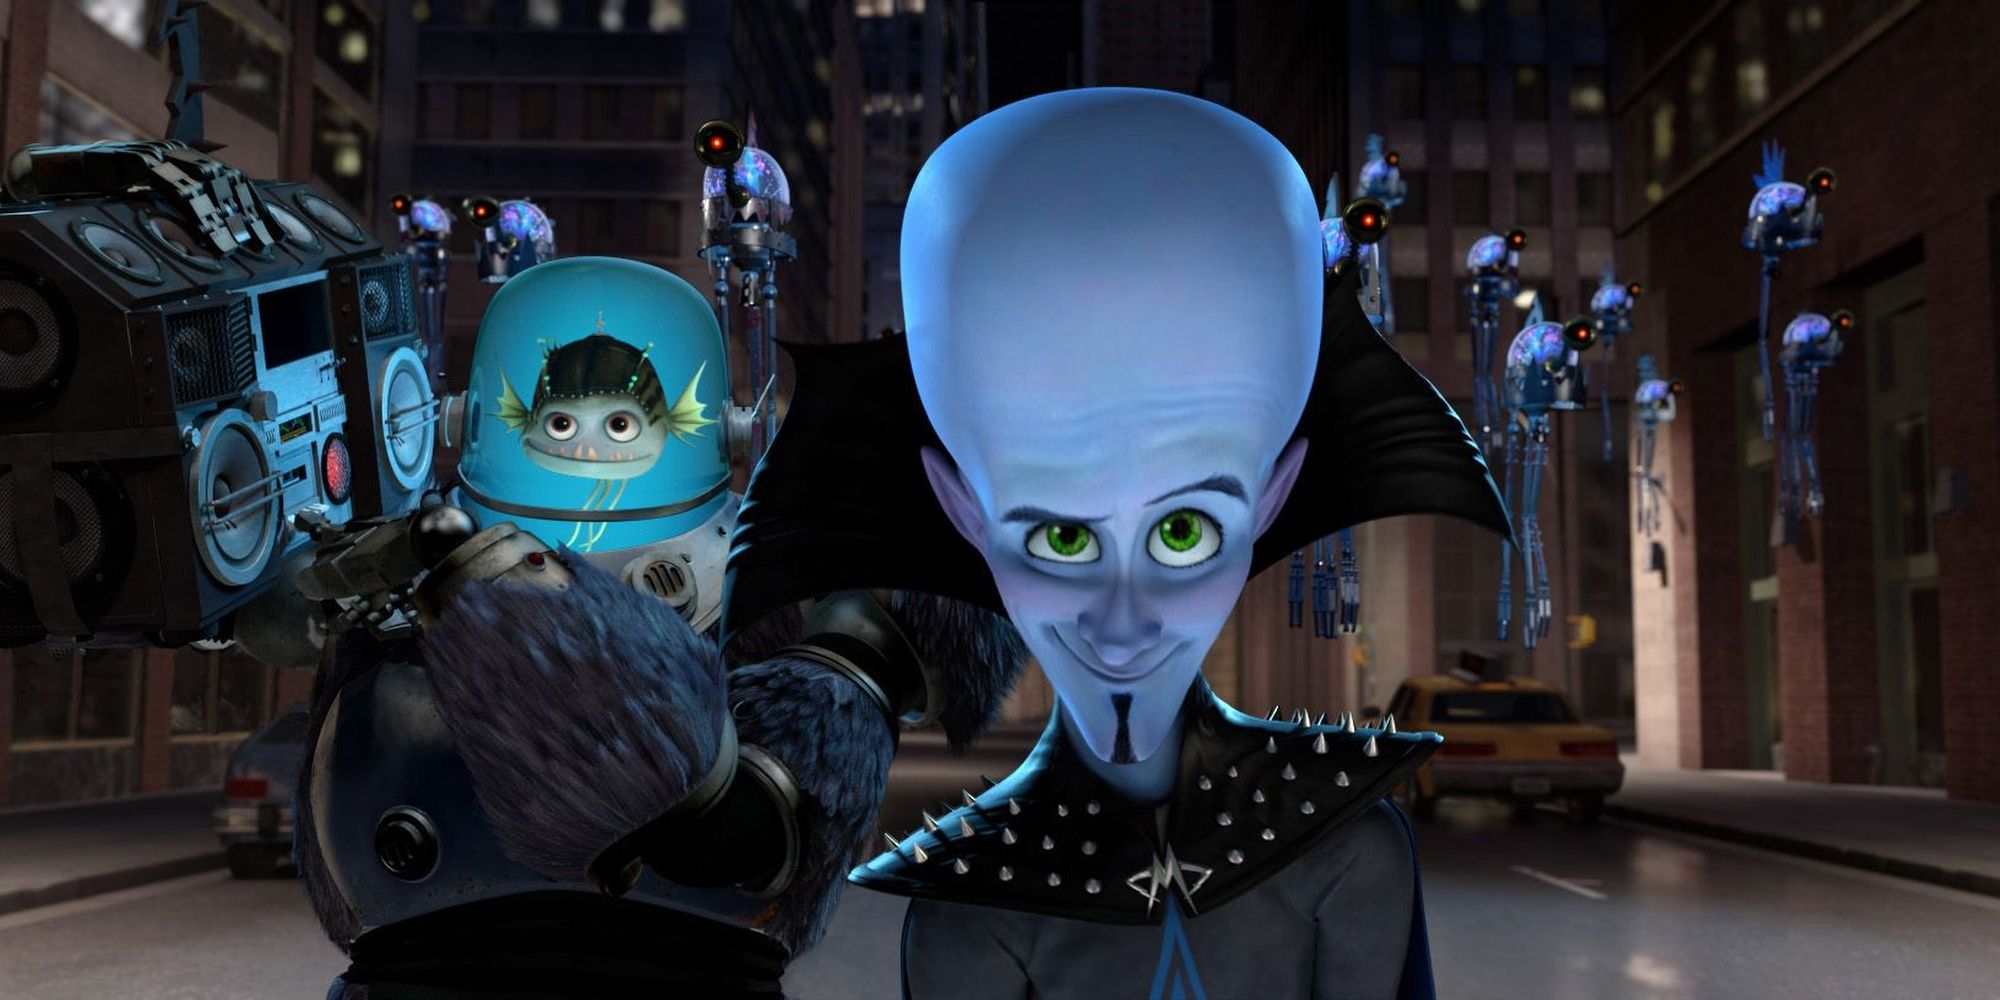 Victory of Megamind and Minion walking through the streets of Metro City.